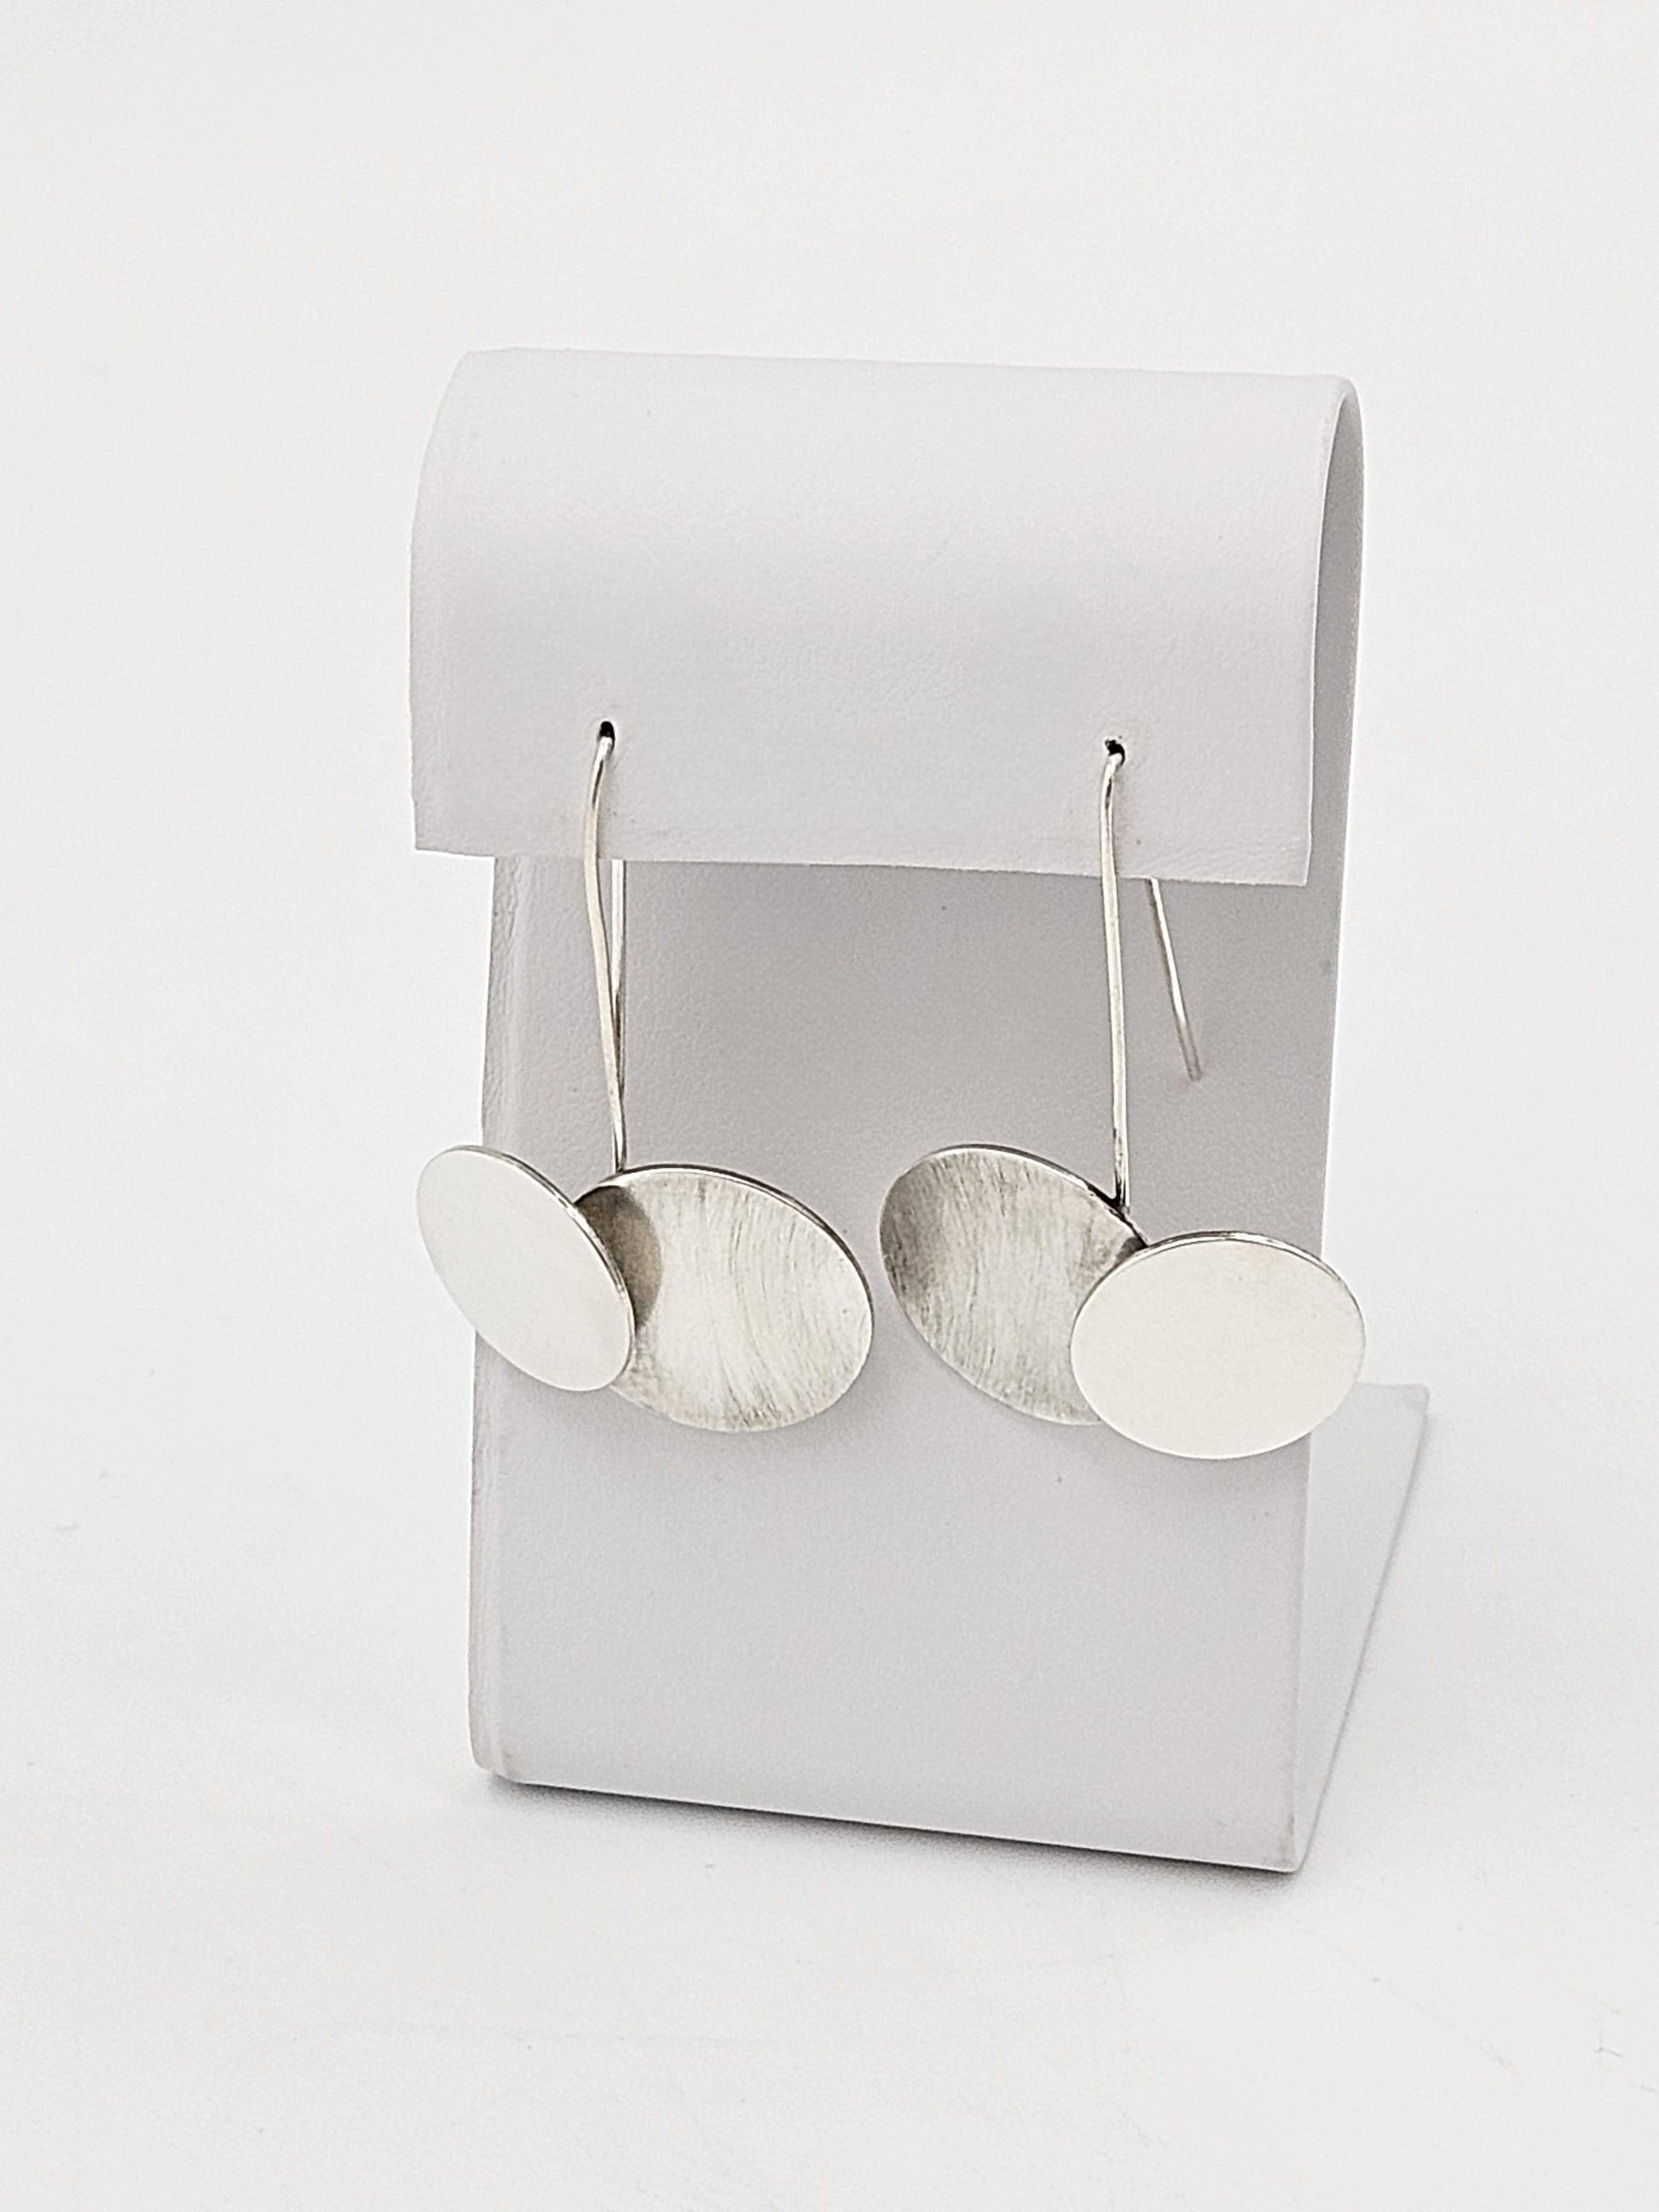 Betty Cooke Jewelry Superb US Designer Betty Cooke 3D Modernist Sterling Silver Disc Earrings 70/80s